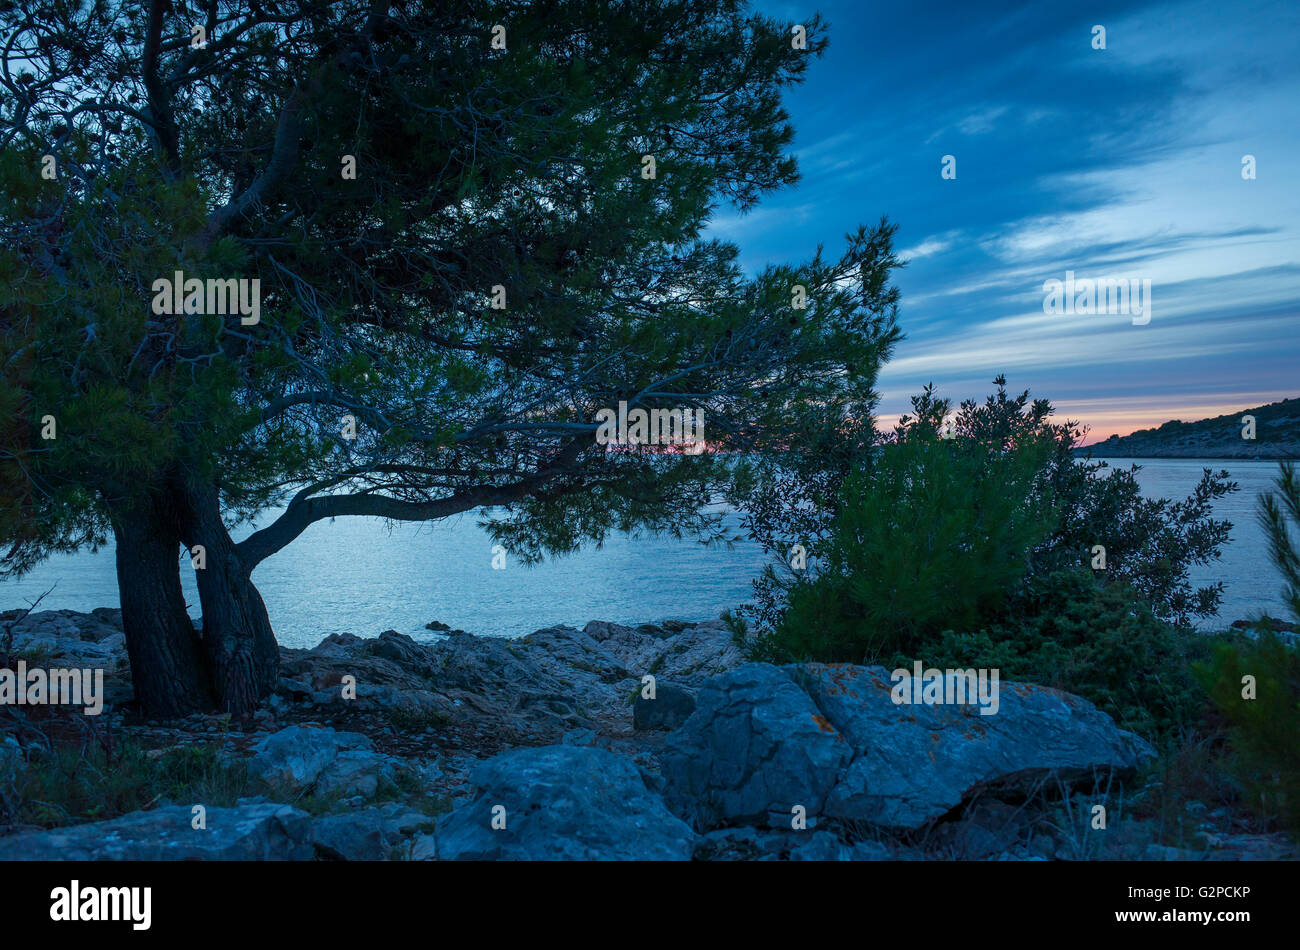 Razanj Croatia Europe. Landscape and nature photo. Adriatic Sea at dawn after sunset. Calm warm summer evening with beautiful colors and tones. Stock Photo